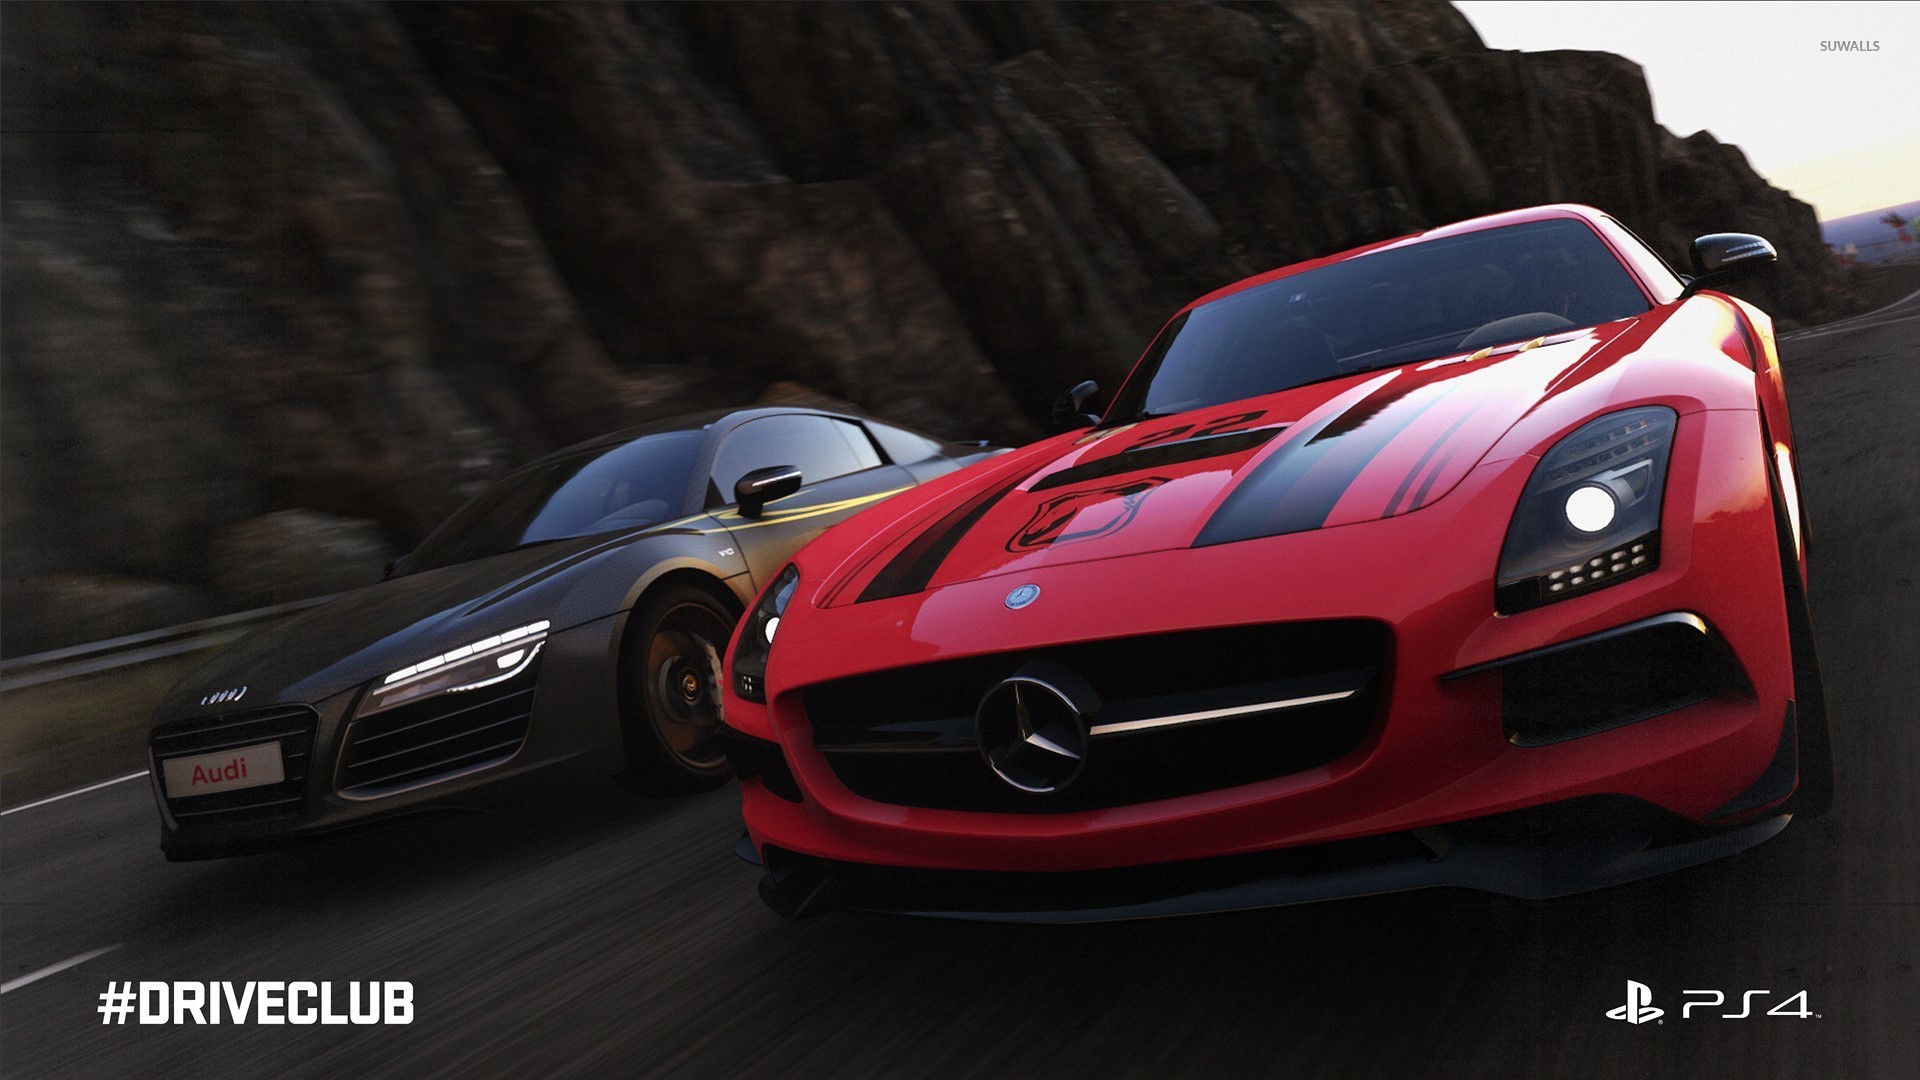 Wallpaper : photo, mode, PlayStation, ps4, Driveclub 1920x1080 - - 951595 -  HD Wallpapers - WallHere